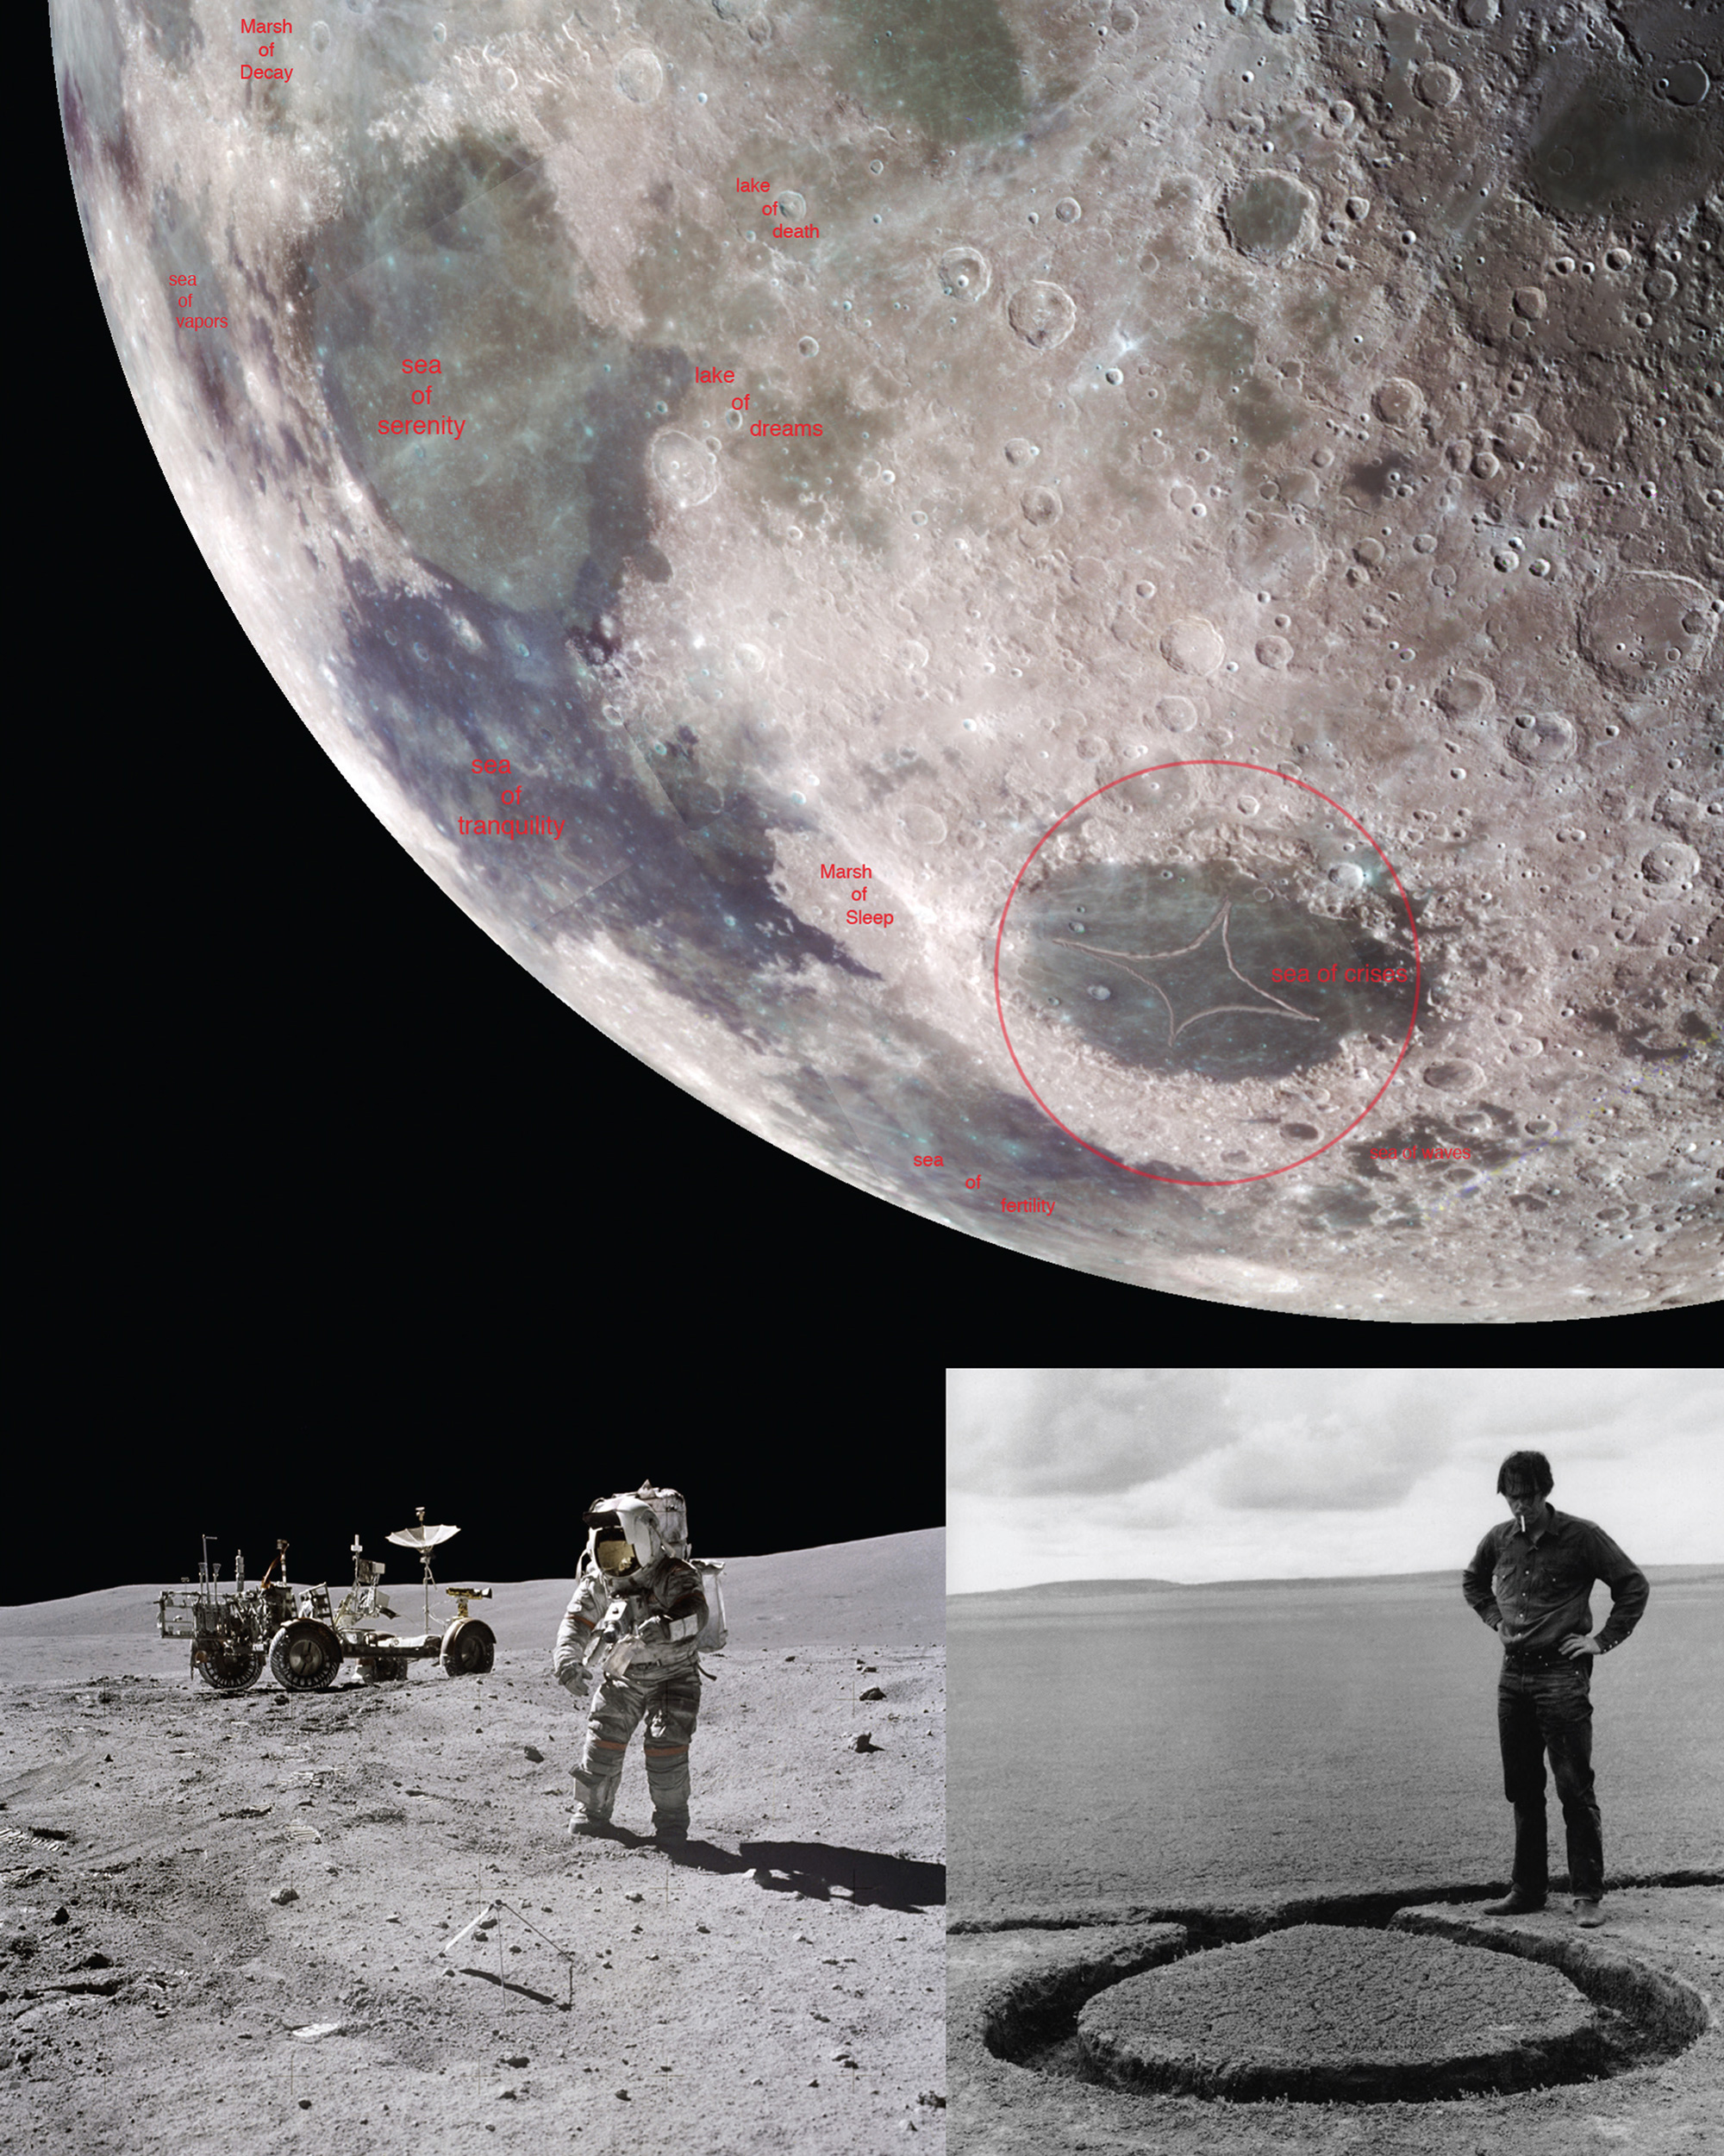 Three images showing the surface of the moon, an astronaut on the moon, and a man standing above a dug out trench.